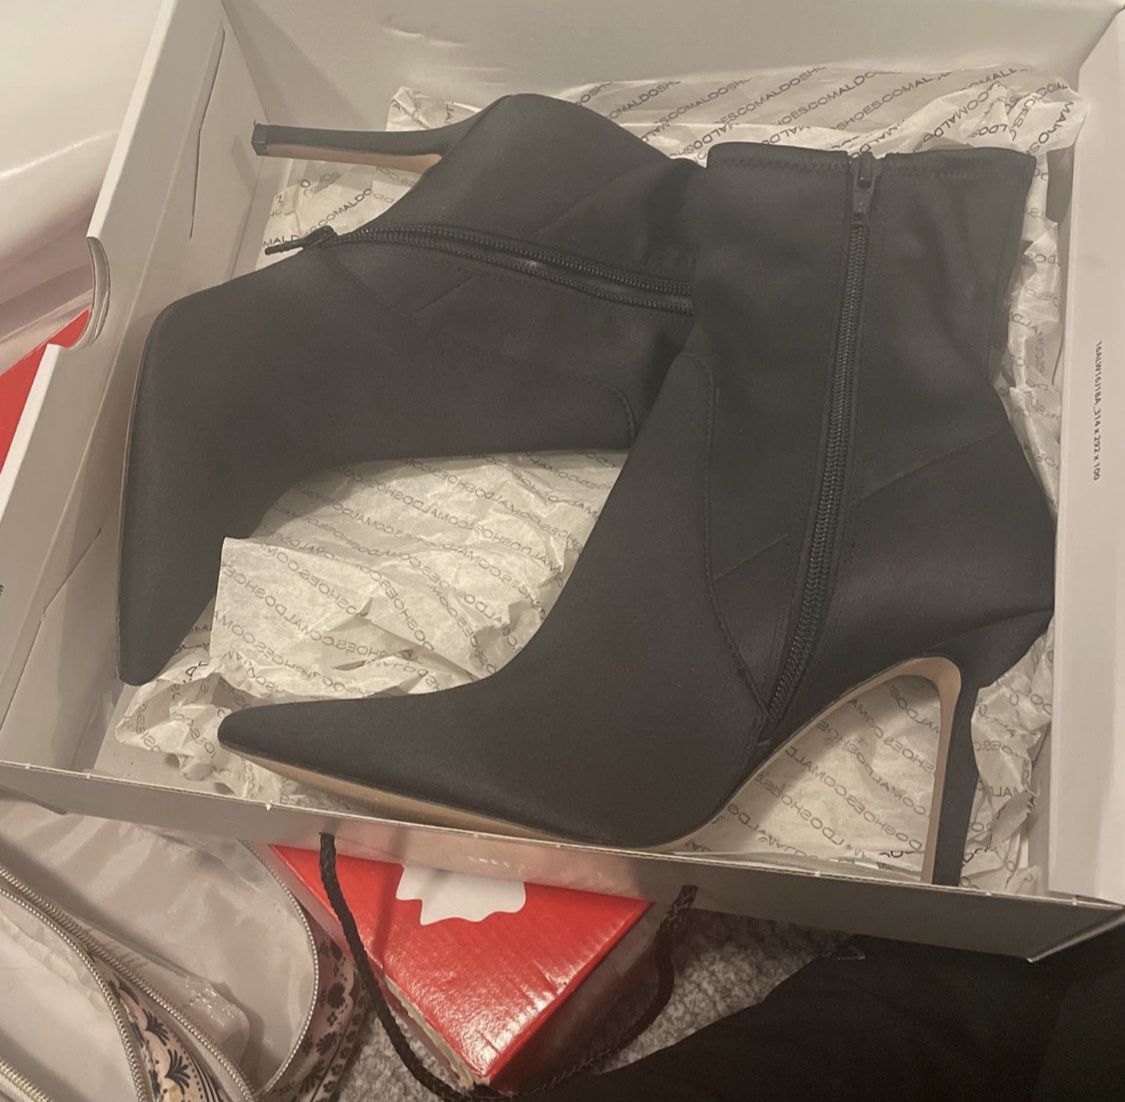 Womens High Heel  Boots  From Aldo CHECKOUT MY OTHER LISTINGS